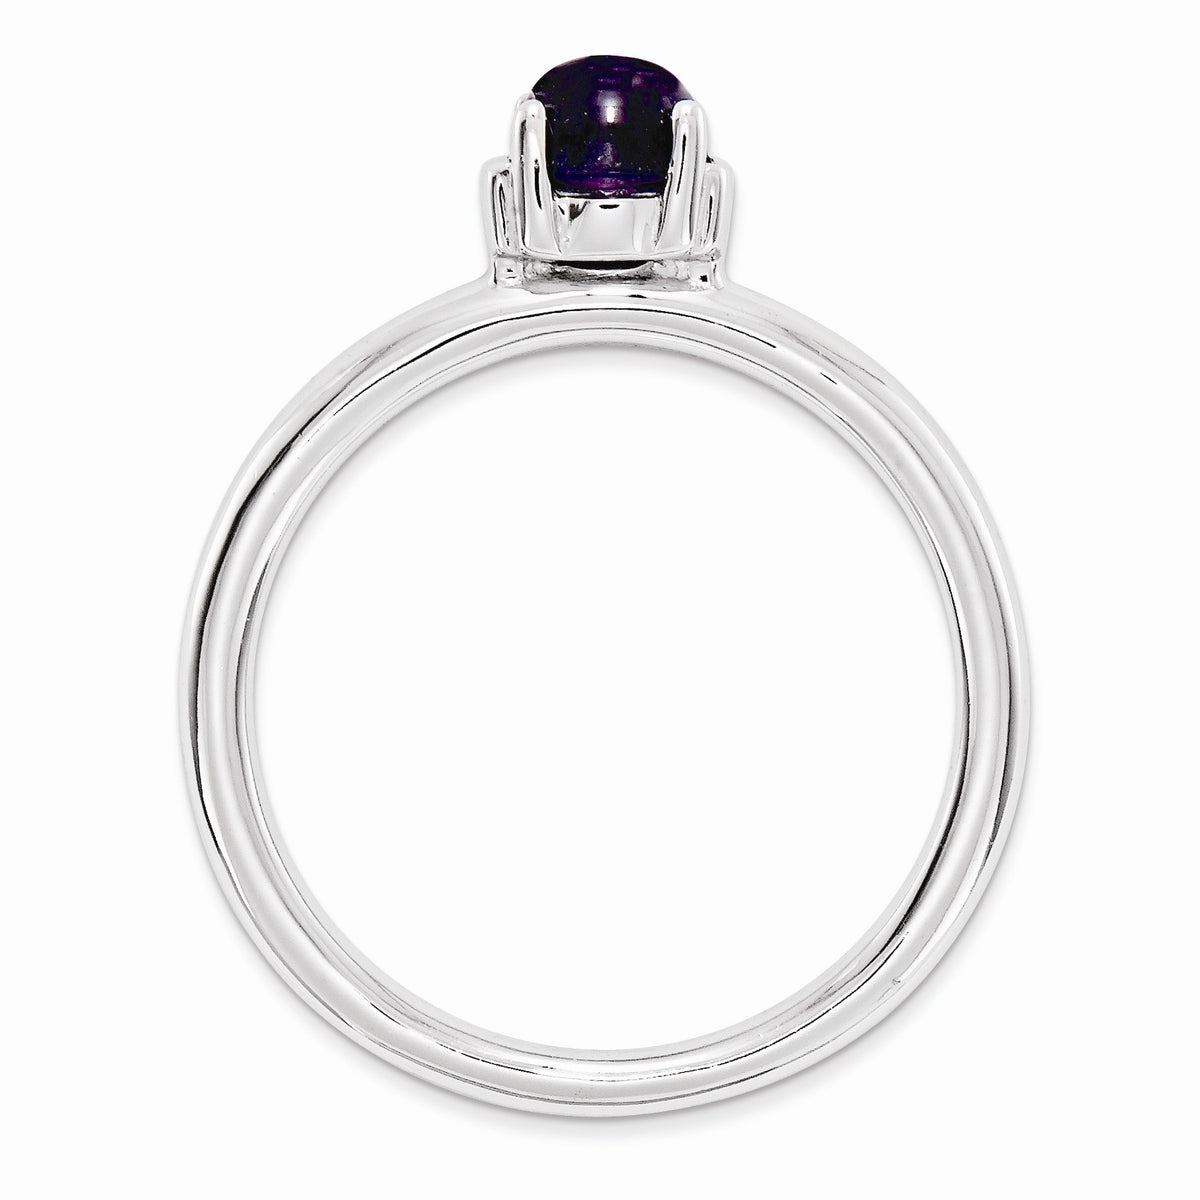 Alternate view of the Sterling Silver &amp; Amethyst 5mm Round Cabochon Solitaire Stackable Ring by The Black Bow Jewelry Co.